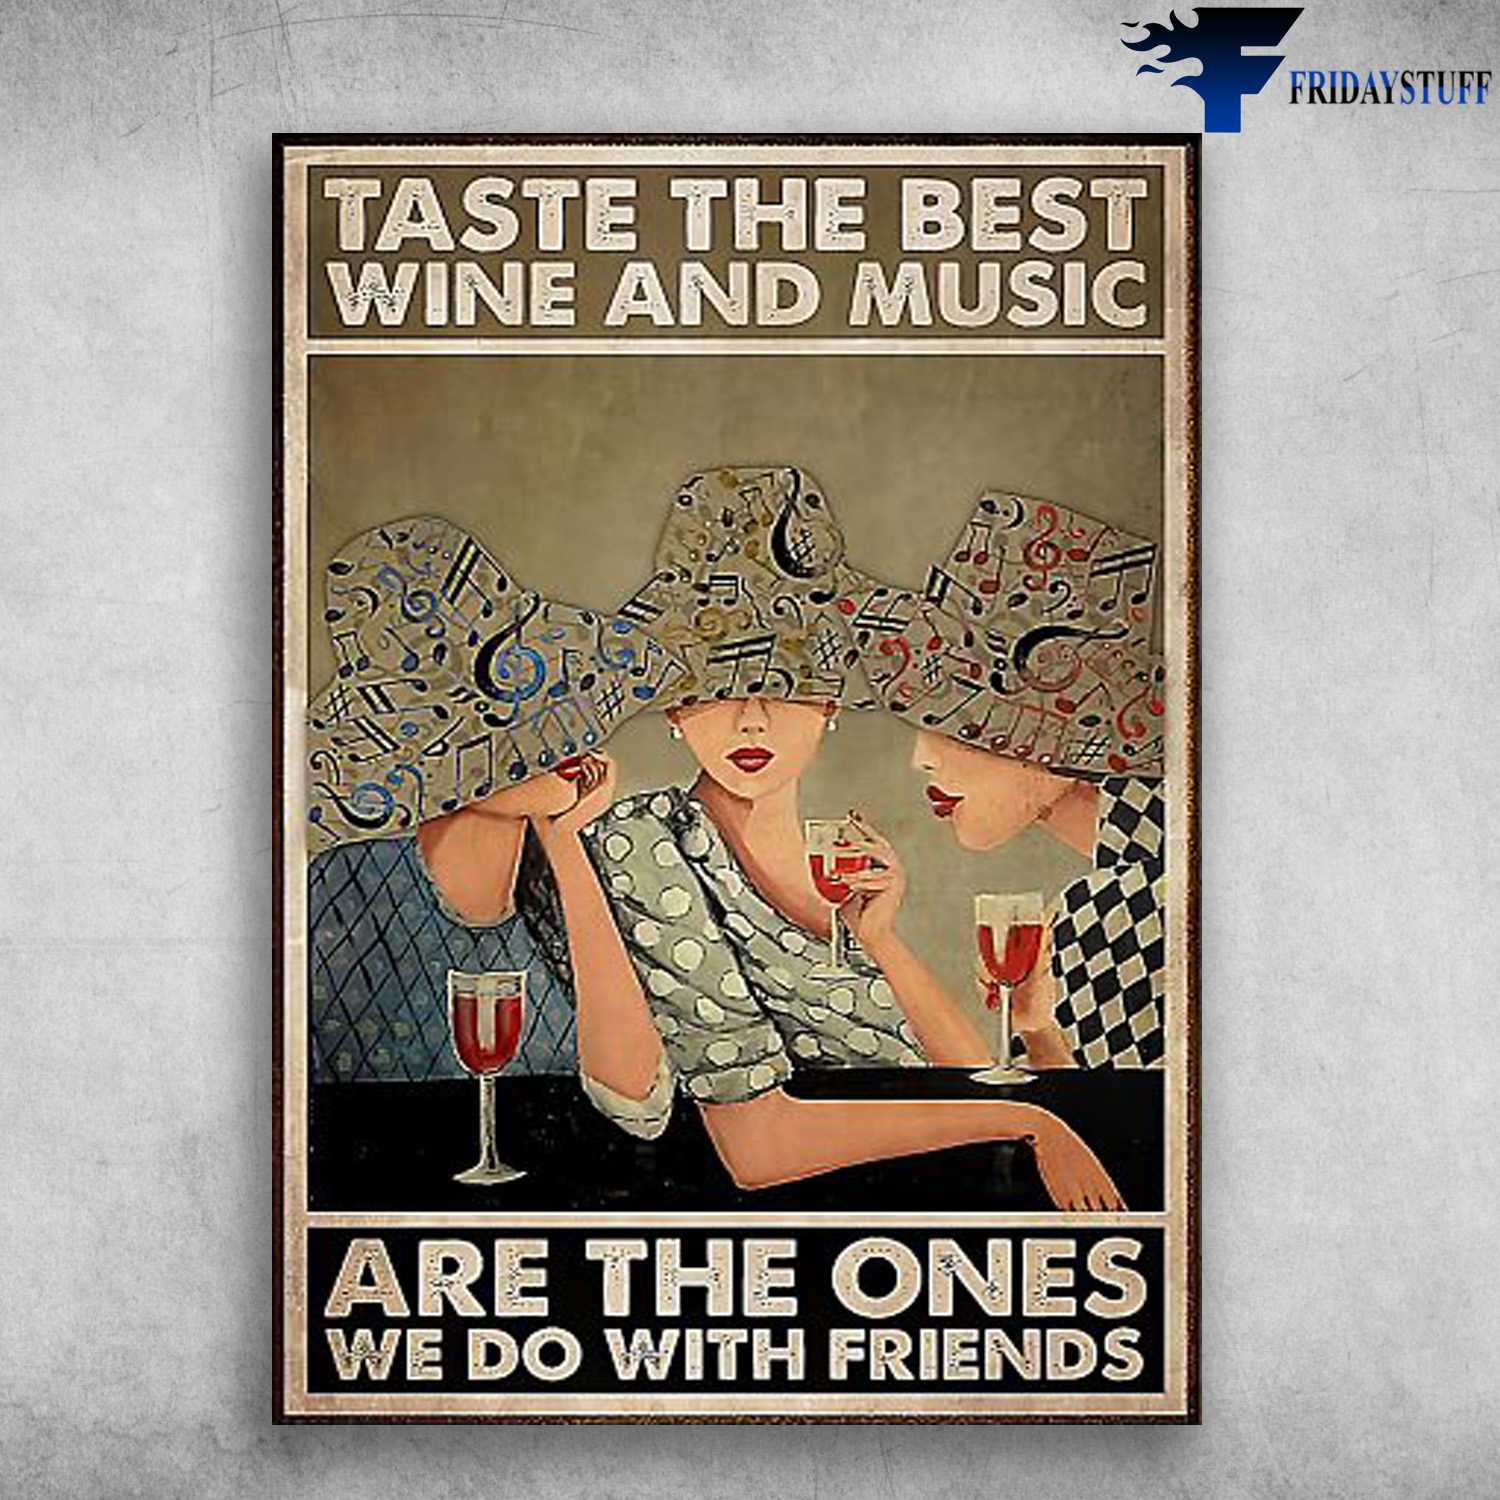 Ladies Drink Wine - Taste The Best, Wine And Music, Are The Ones, We Do With Friends